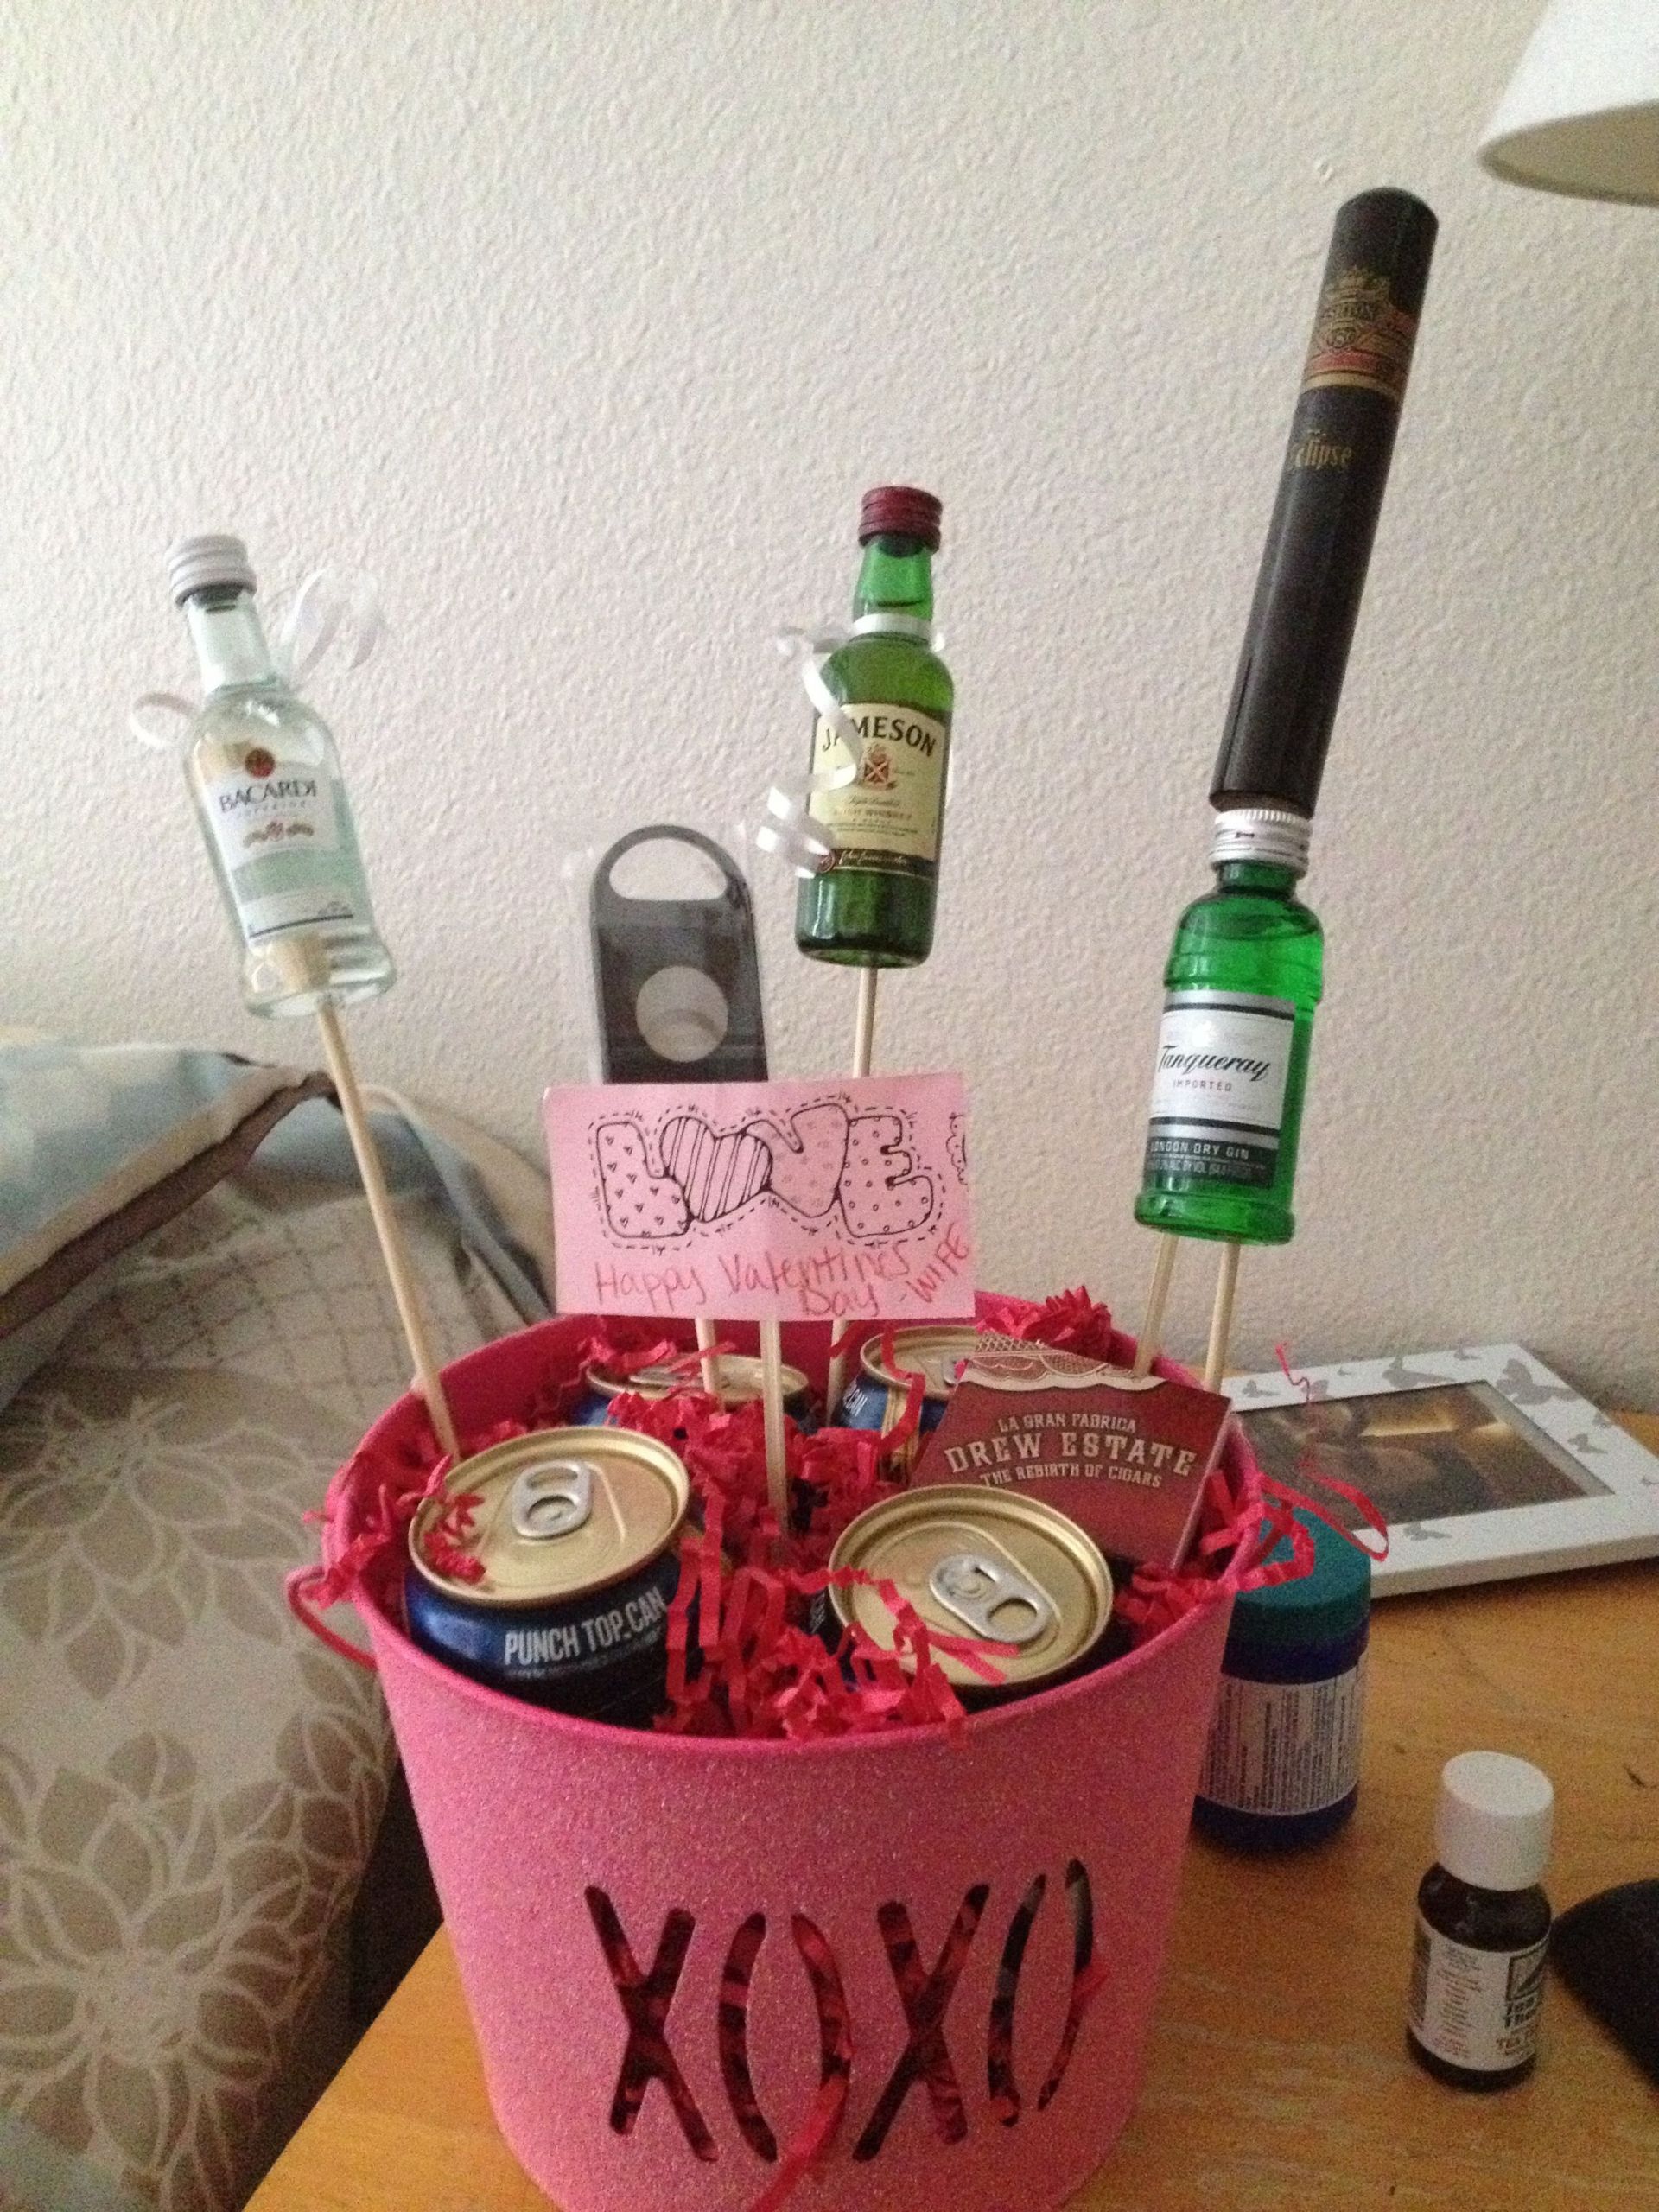 Valentines Gift Ideas For Husbands
 I would do this in Christmas a theme t for husband